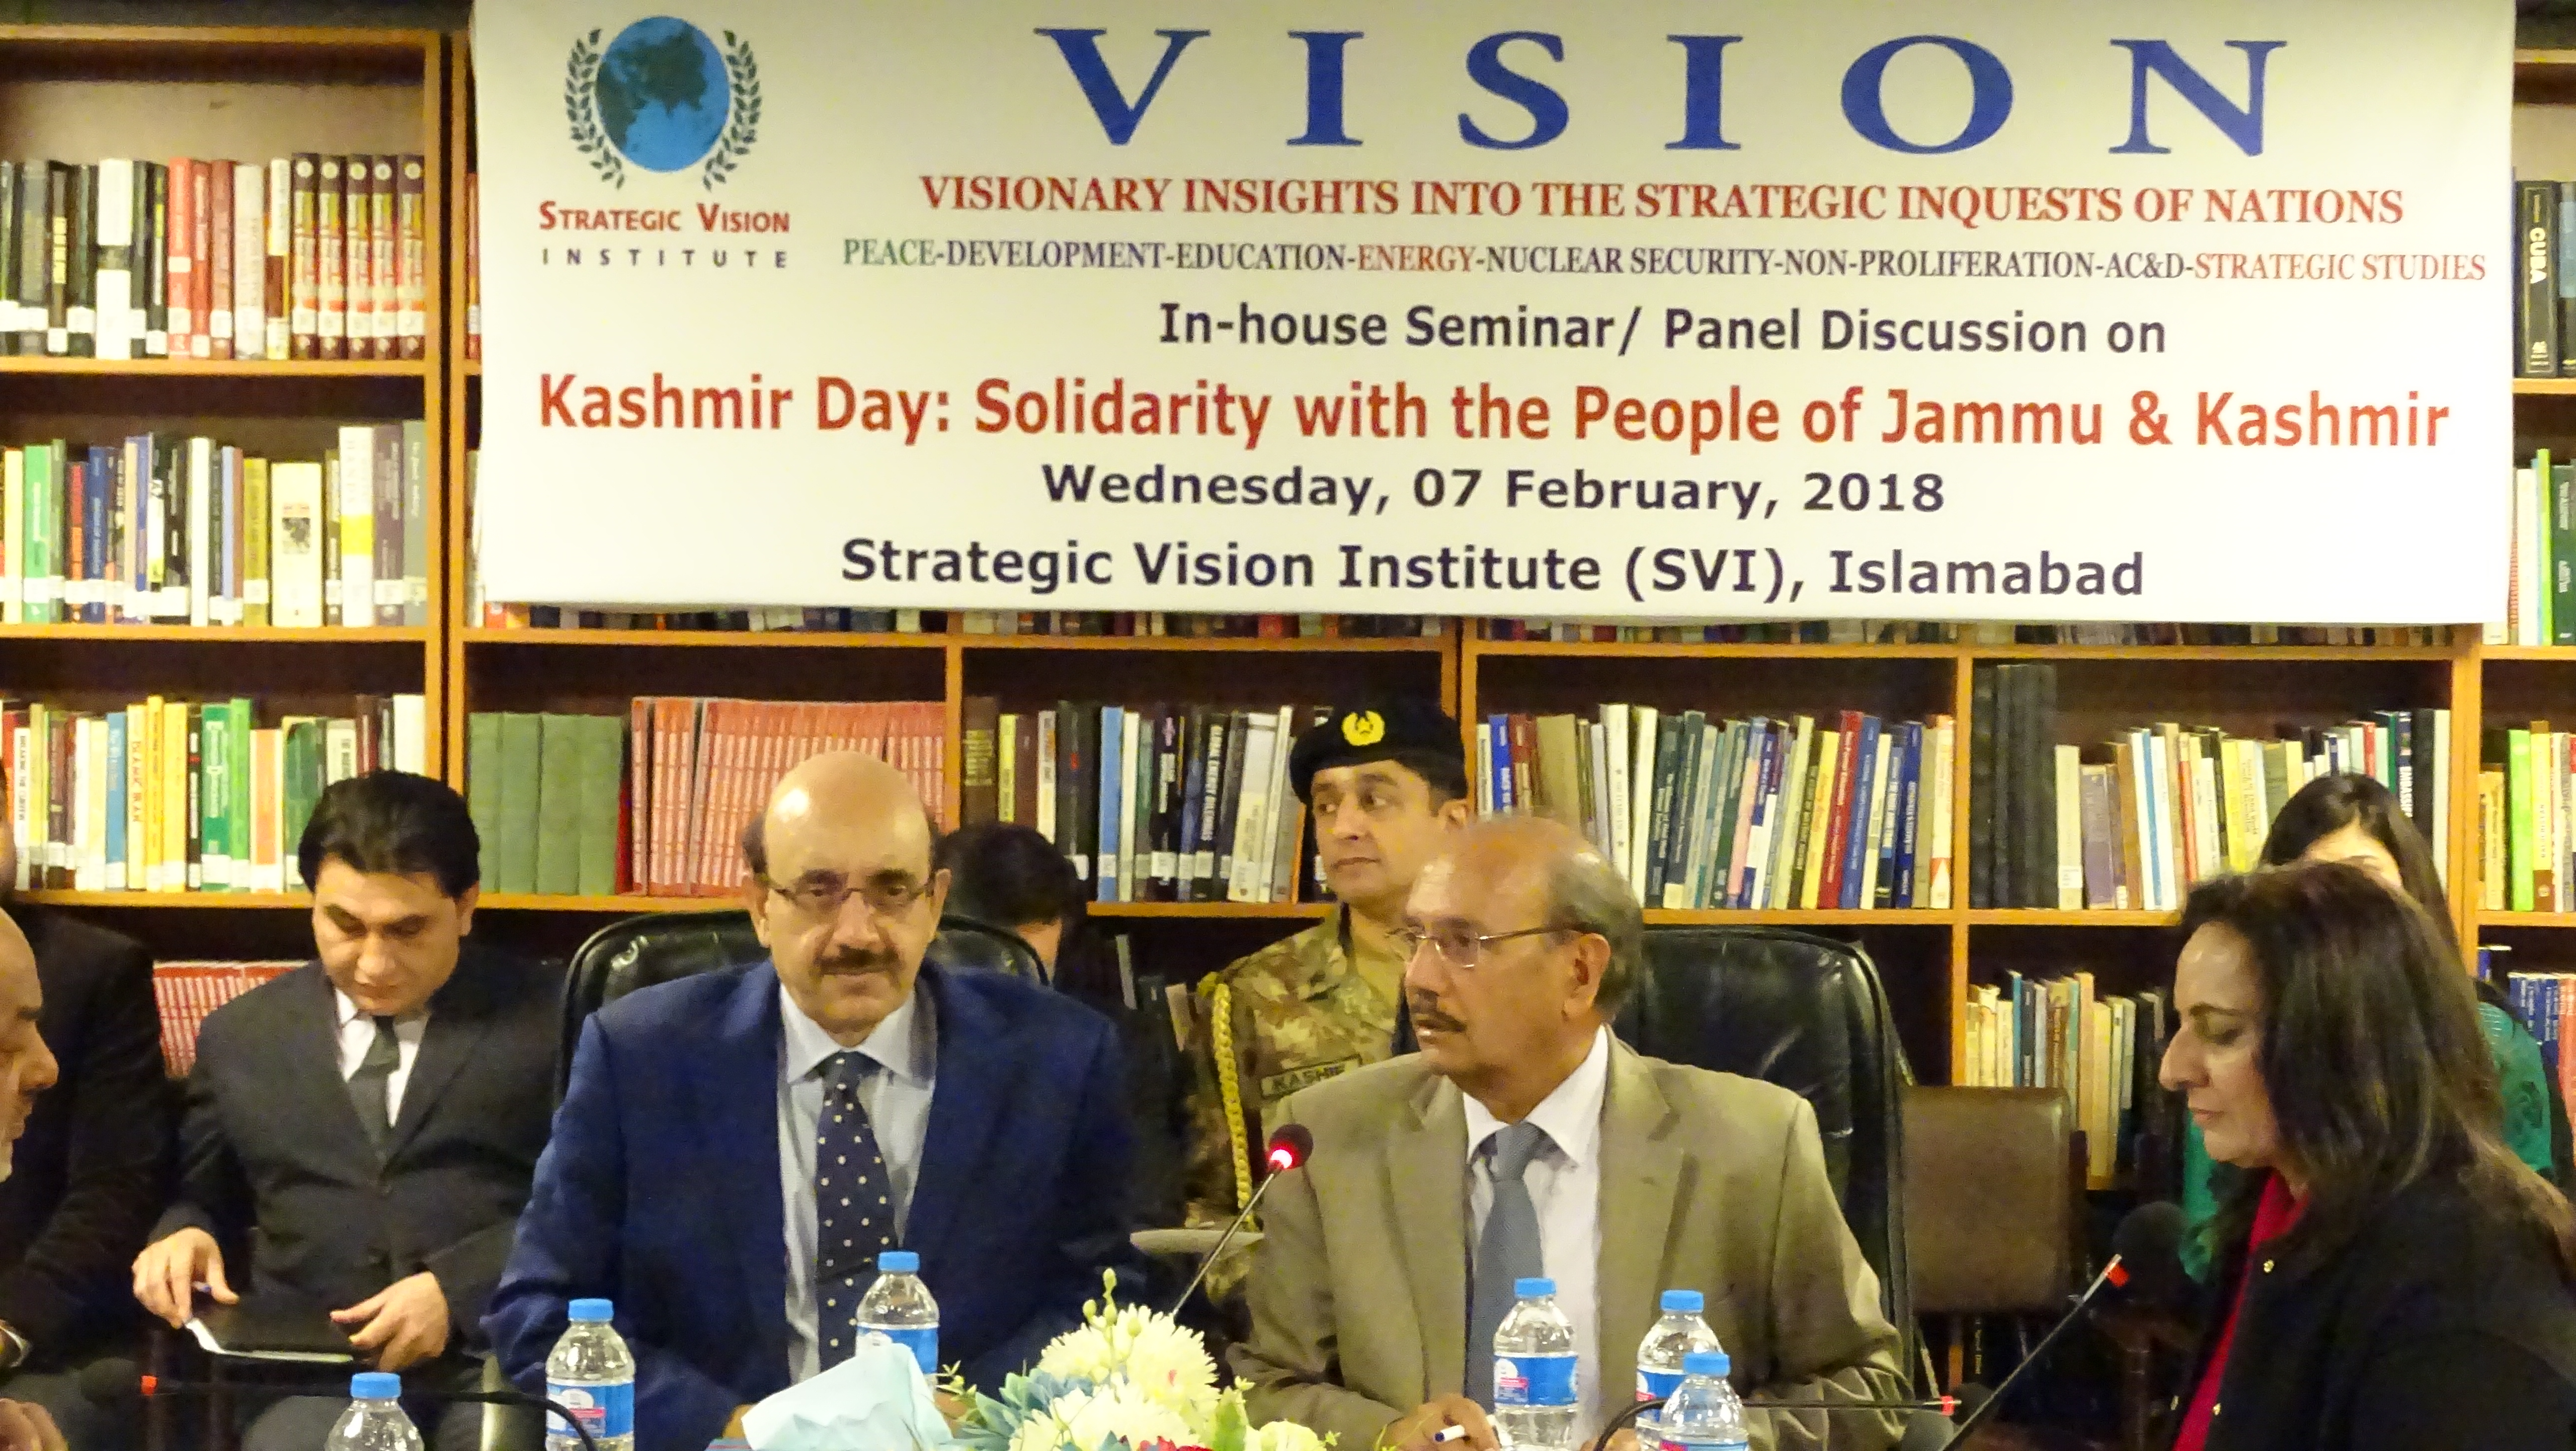 “Kashmir Day: Solidarity with the People of Jammu & Kashmir”